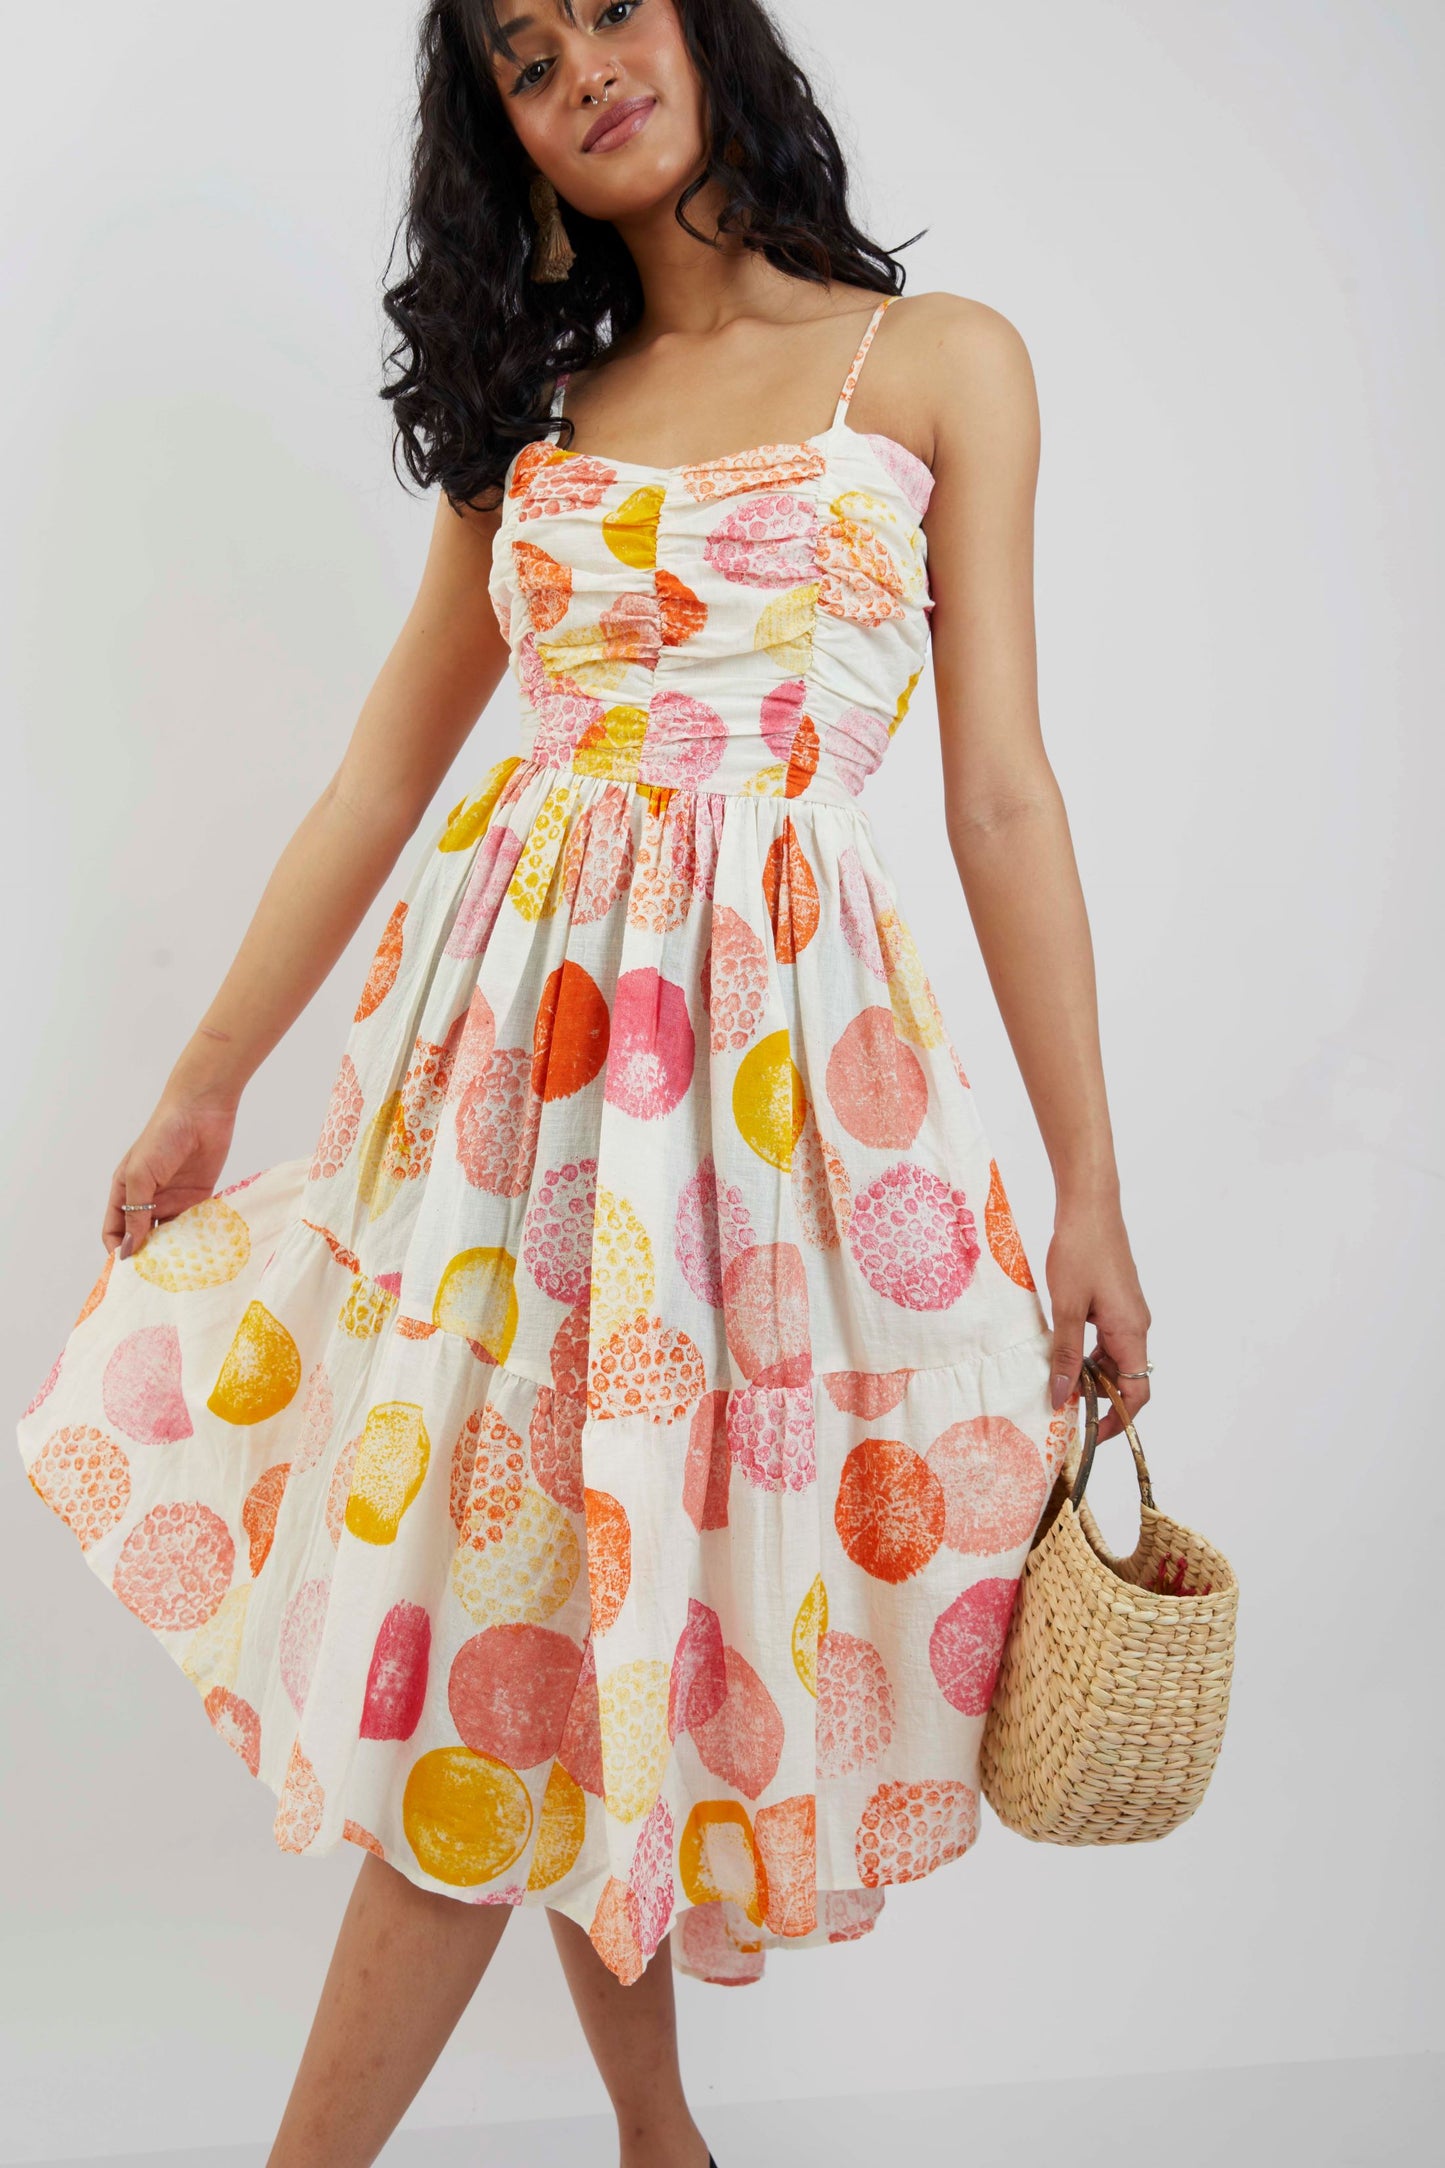 Beautifully Designed Cotton Dress With Hand Block Prints Made by Natural Colors